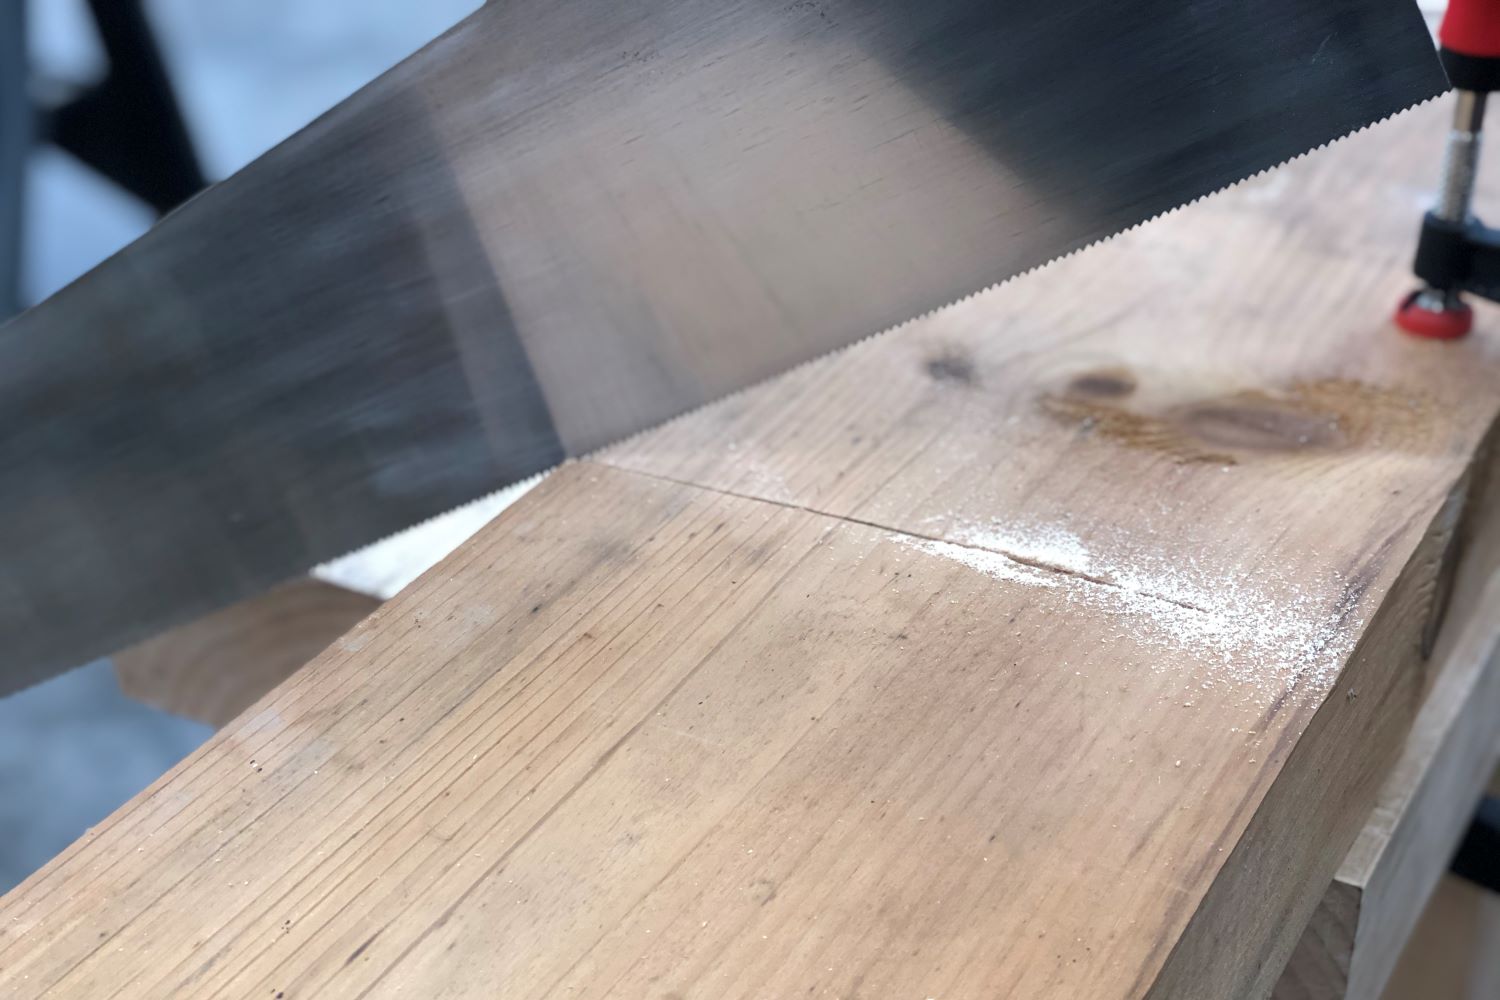 Using Hand Saw Reflection to Make Square Cuts